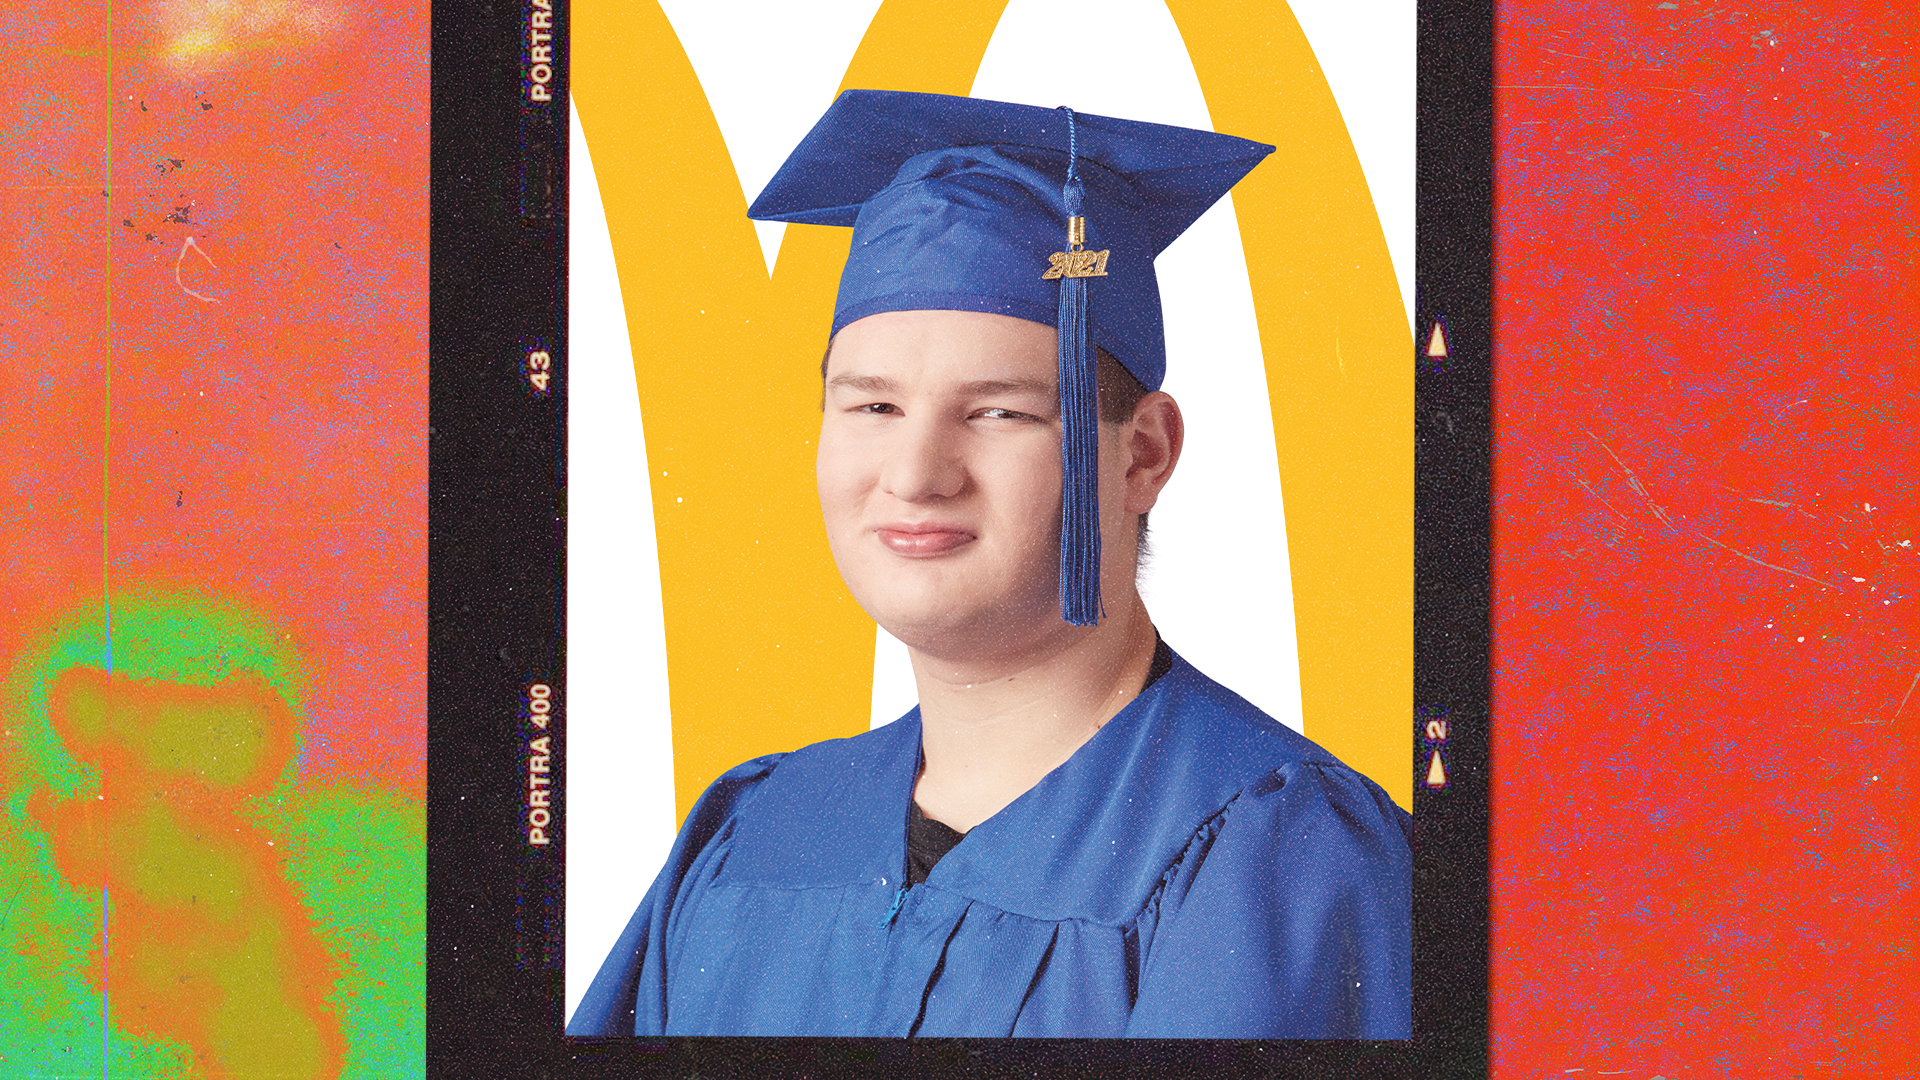 Graduate in blue cap and gown smiling against a colorful abstract background